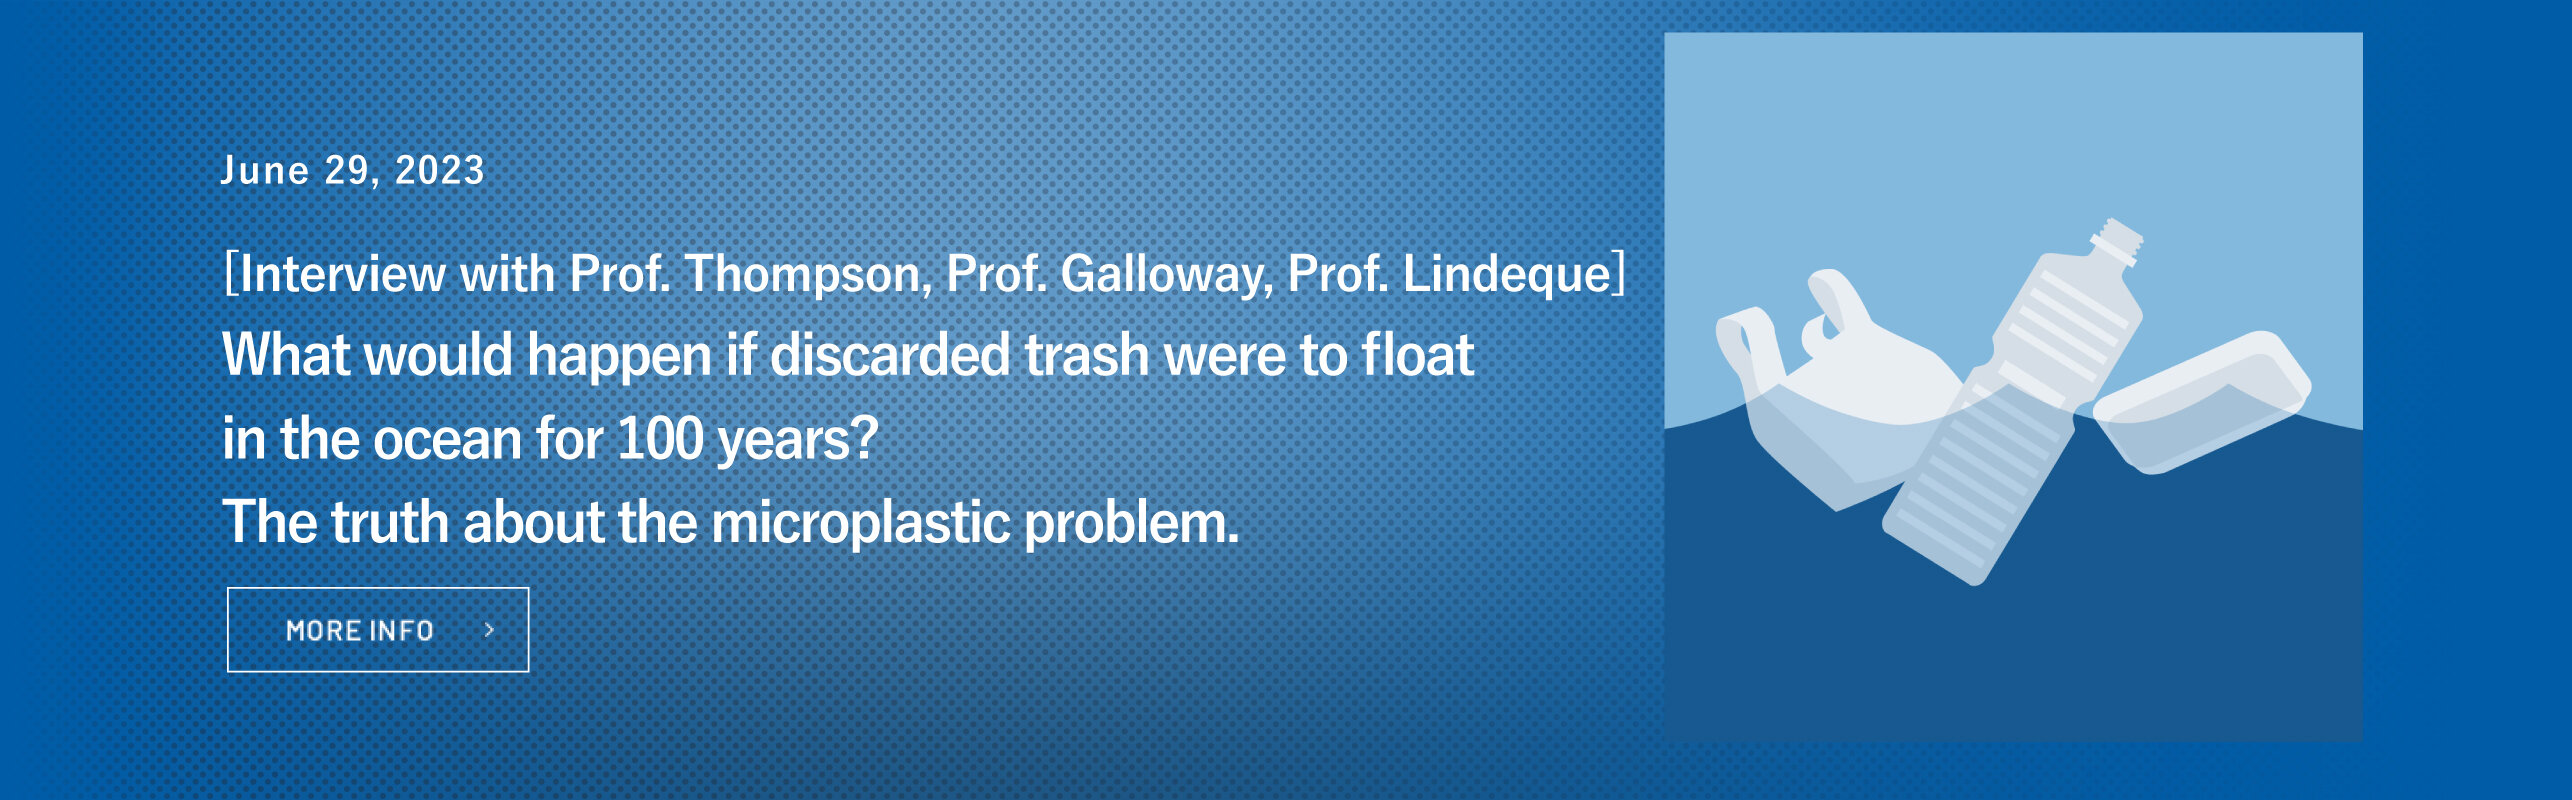 What would happen if discarded trash were to float in the ocean for 100 years? The truth about the microplastic problem.